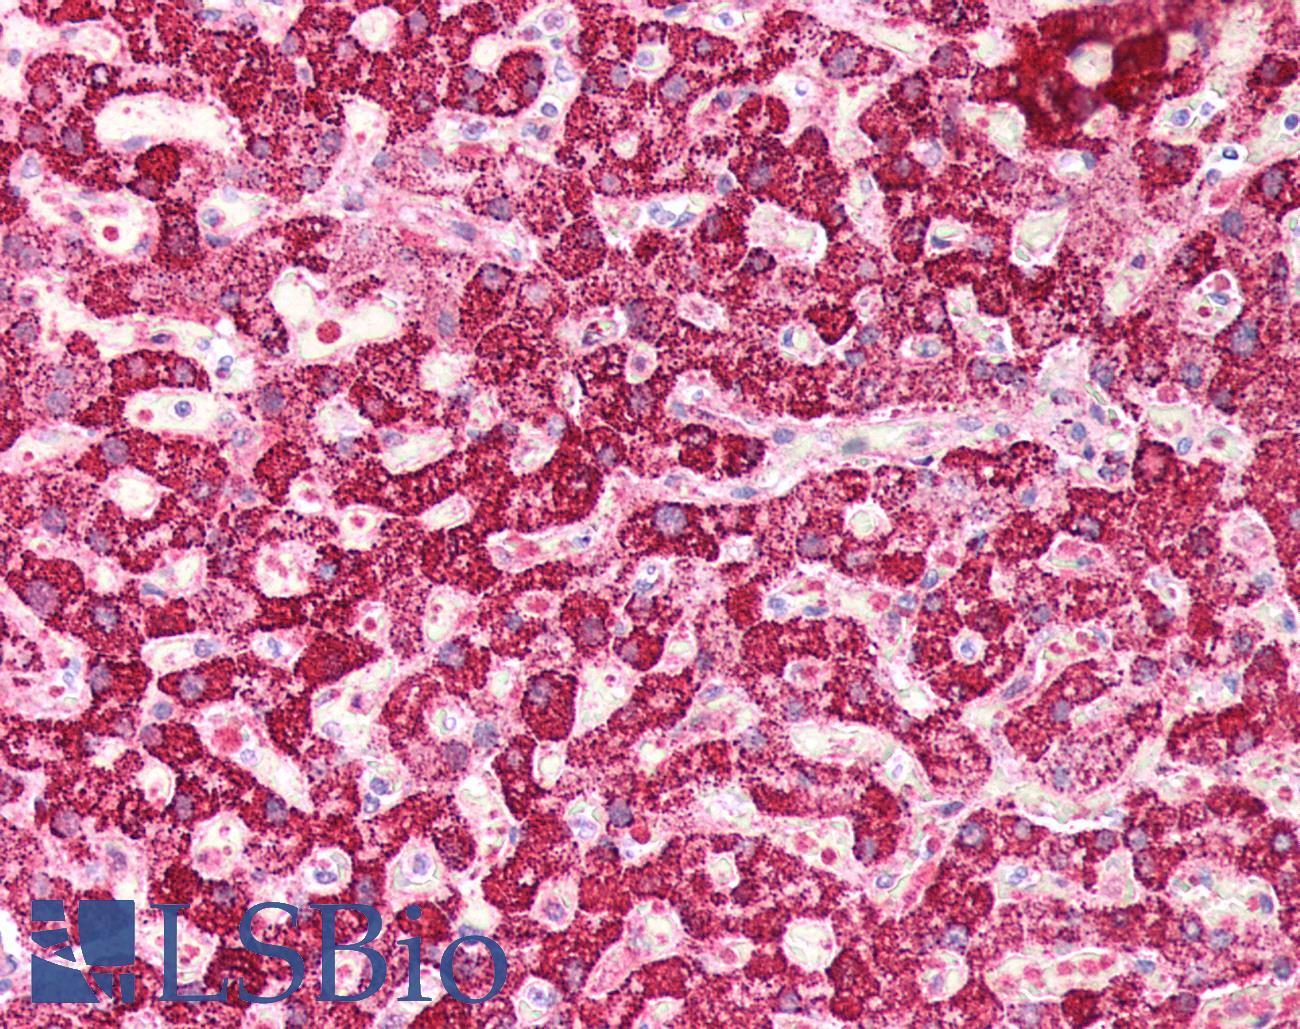 LAP3 Antibody - Human Liver: Formalin-Fixed, Paraffin-Embedded (FFPE)